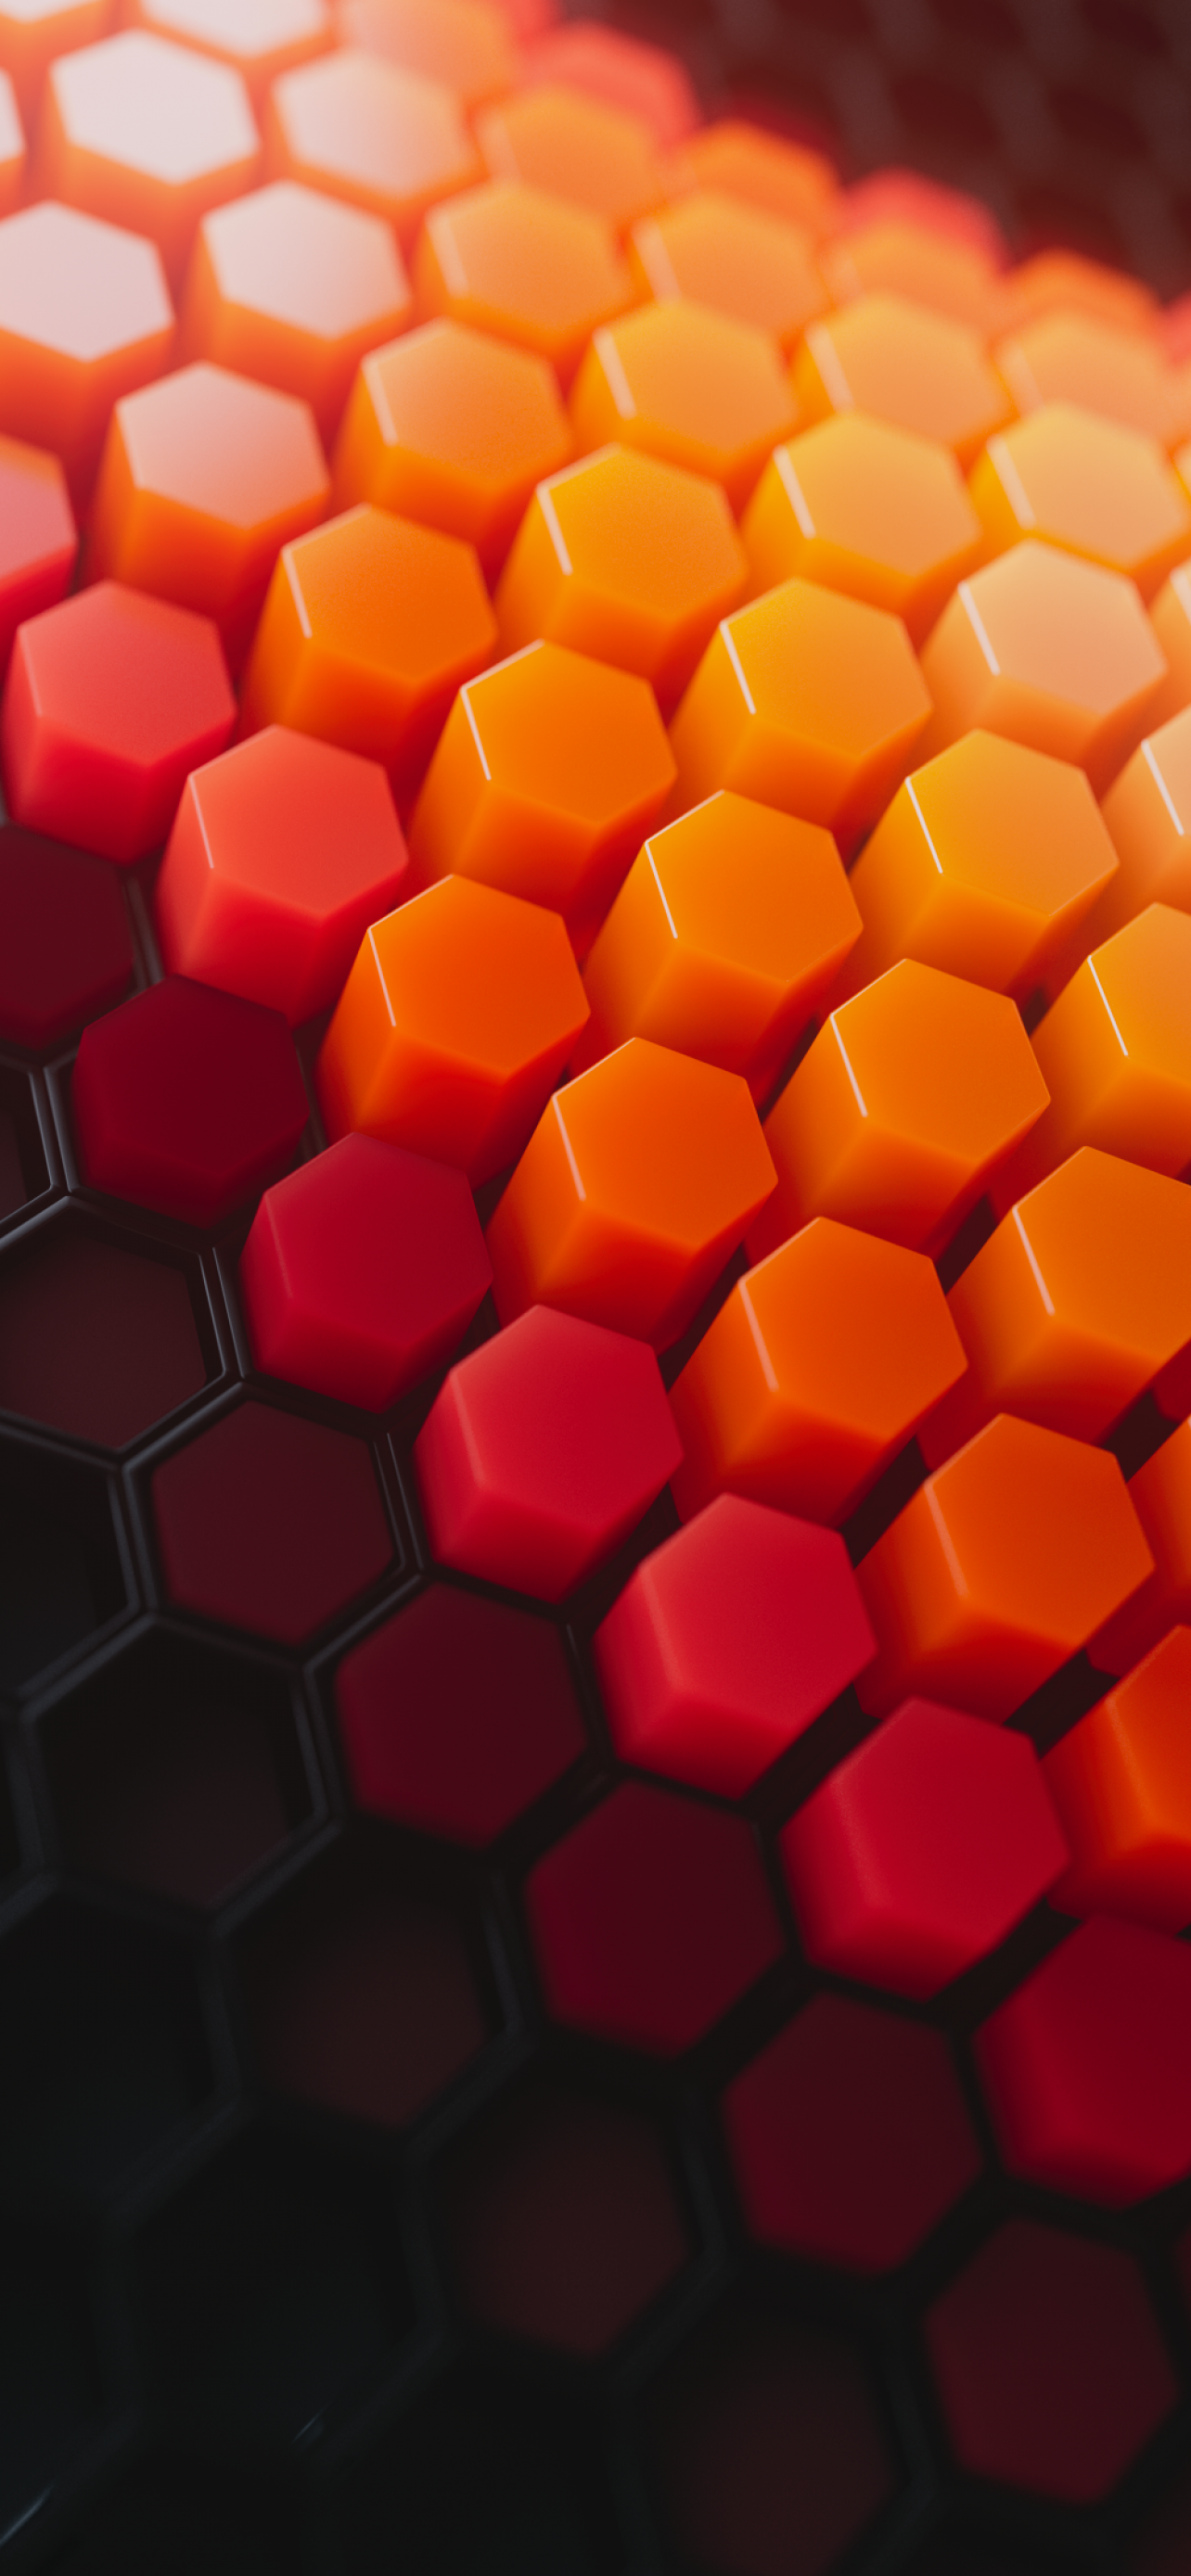 Orange Mesh Points Distortion Black Background 4K HD Abstract Wallpapers   HD Wallpapers  ID 79313